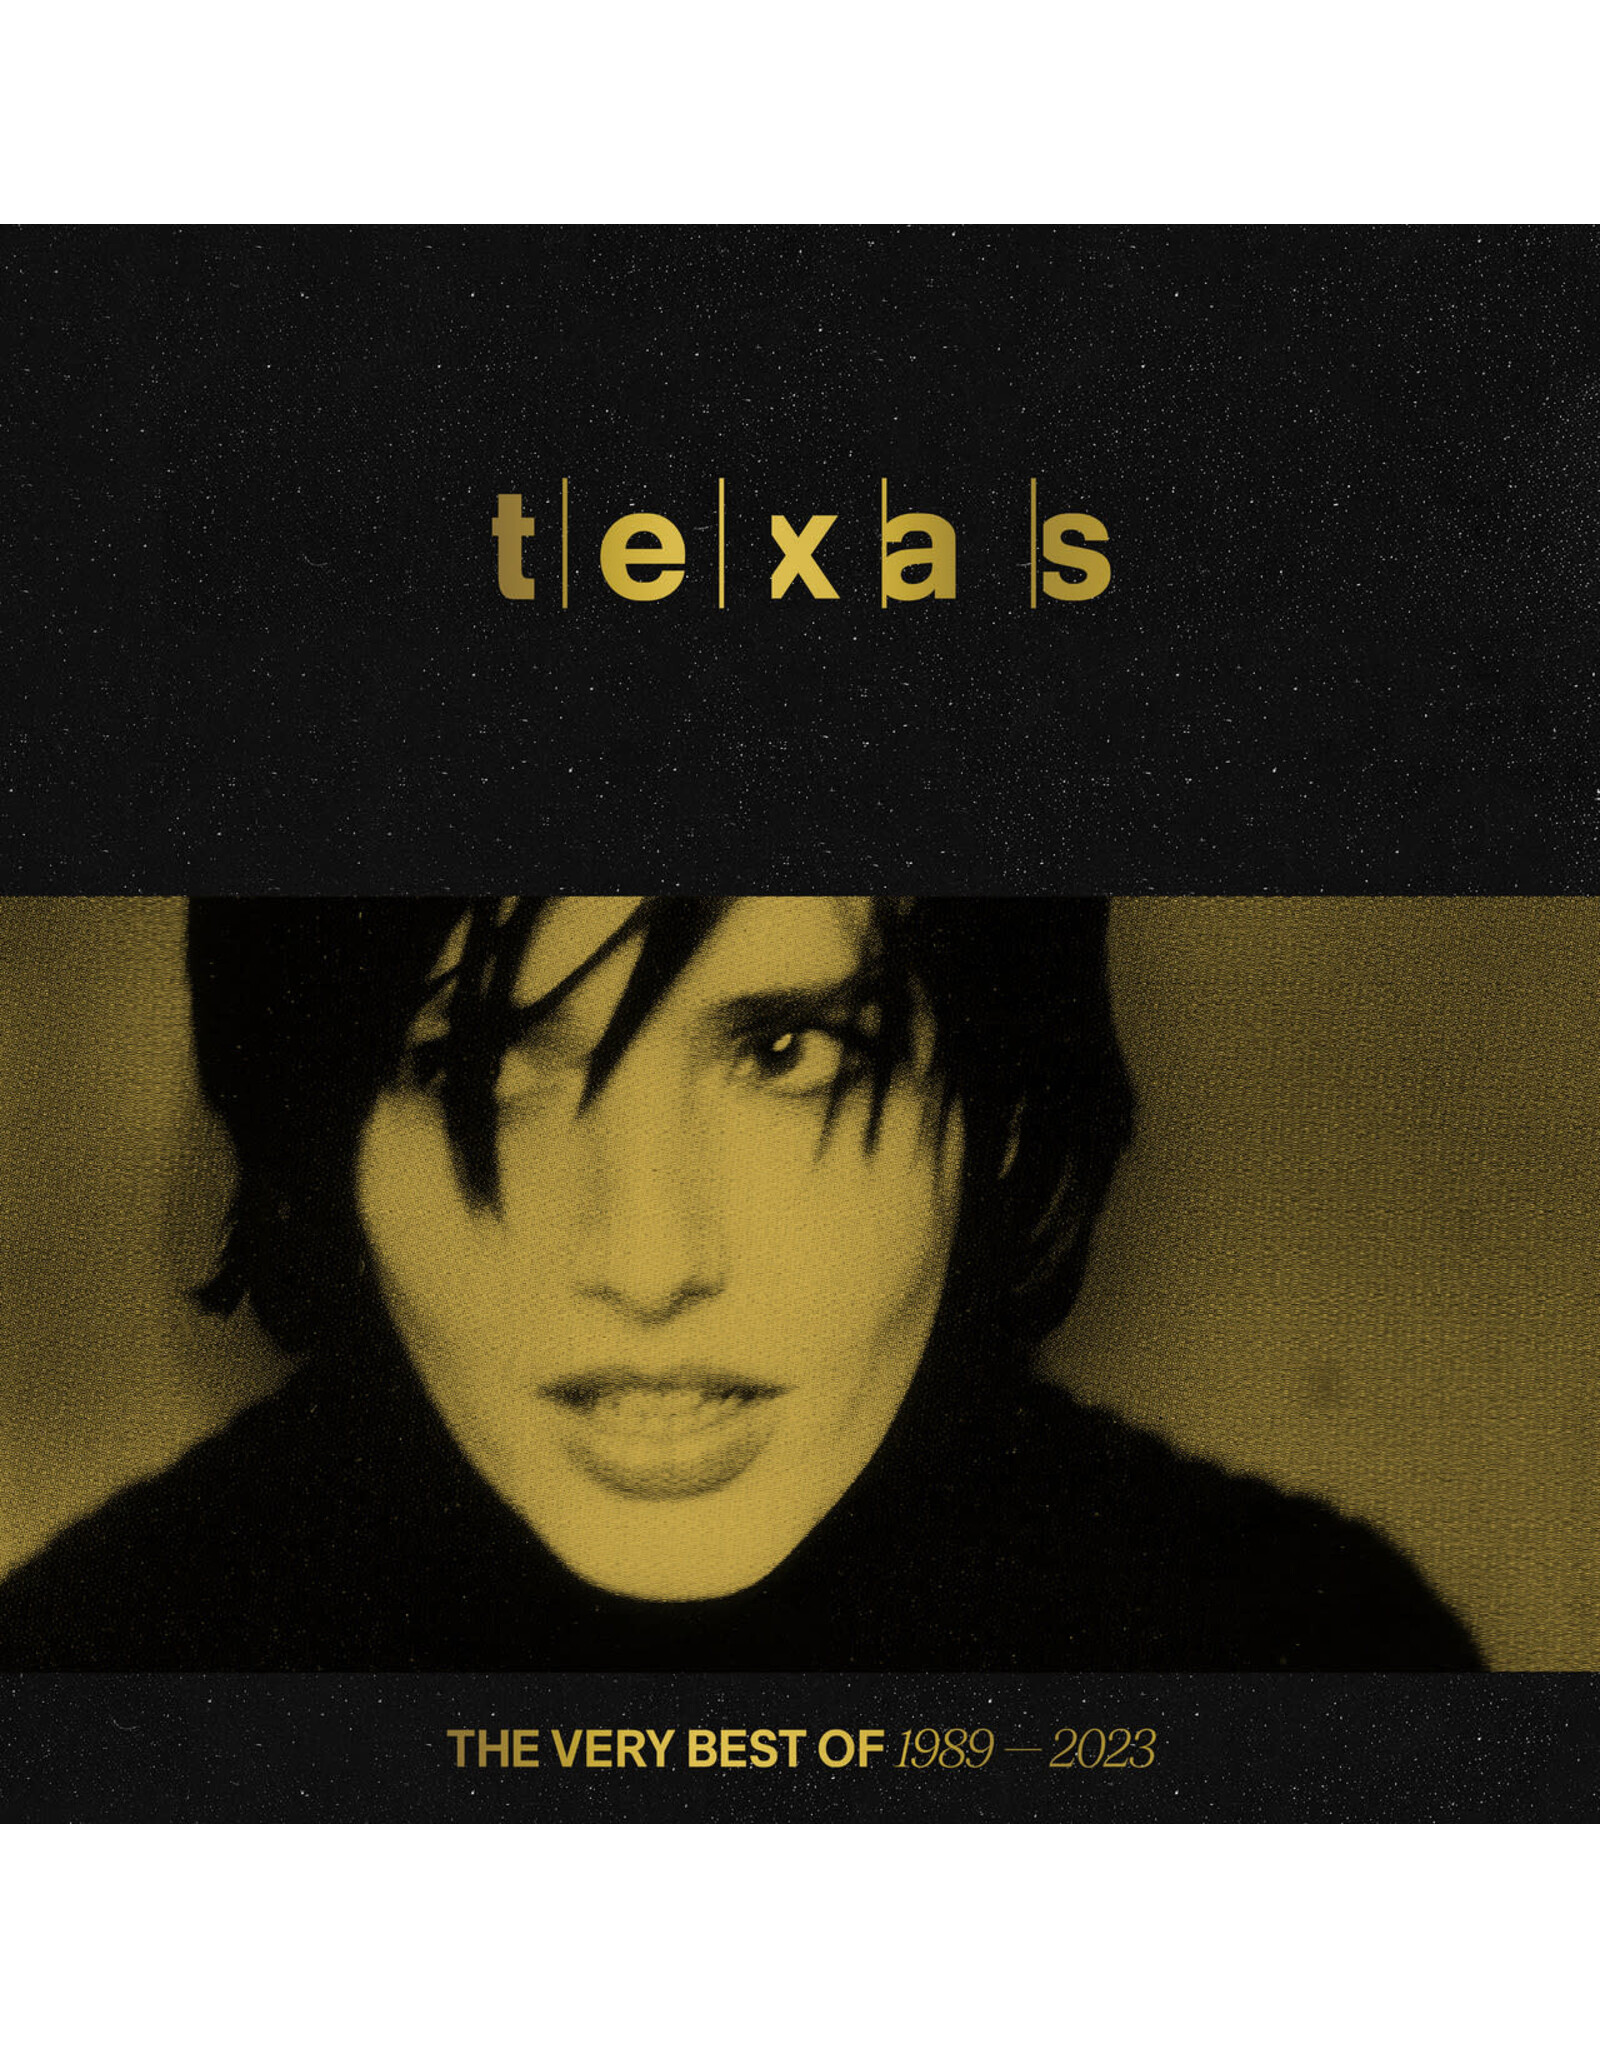 Texas - The Very Best Of: 1989-2023